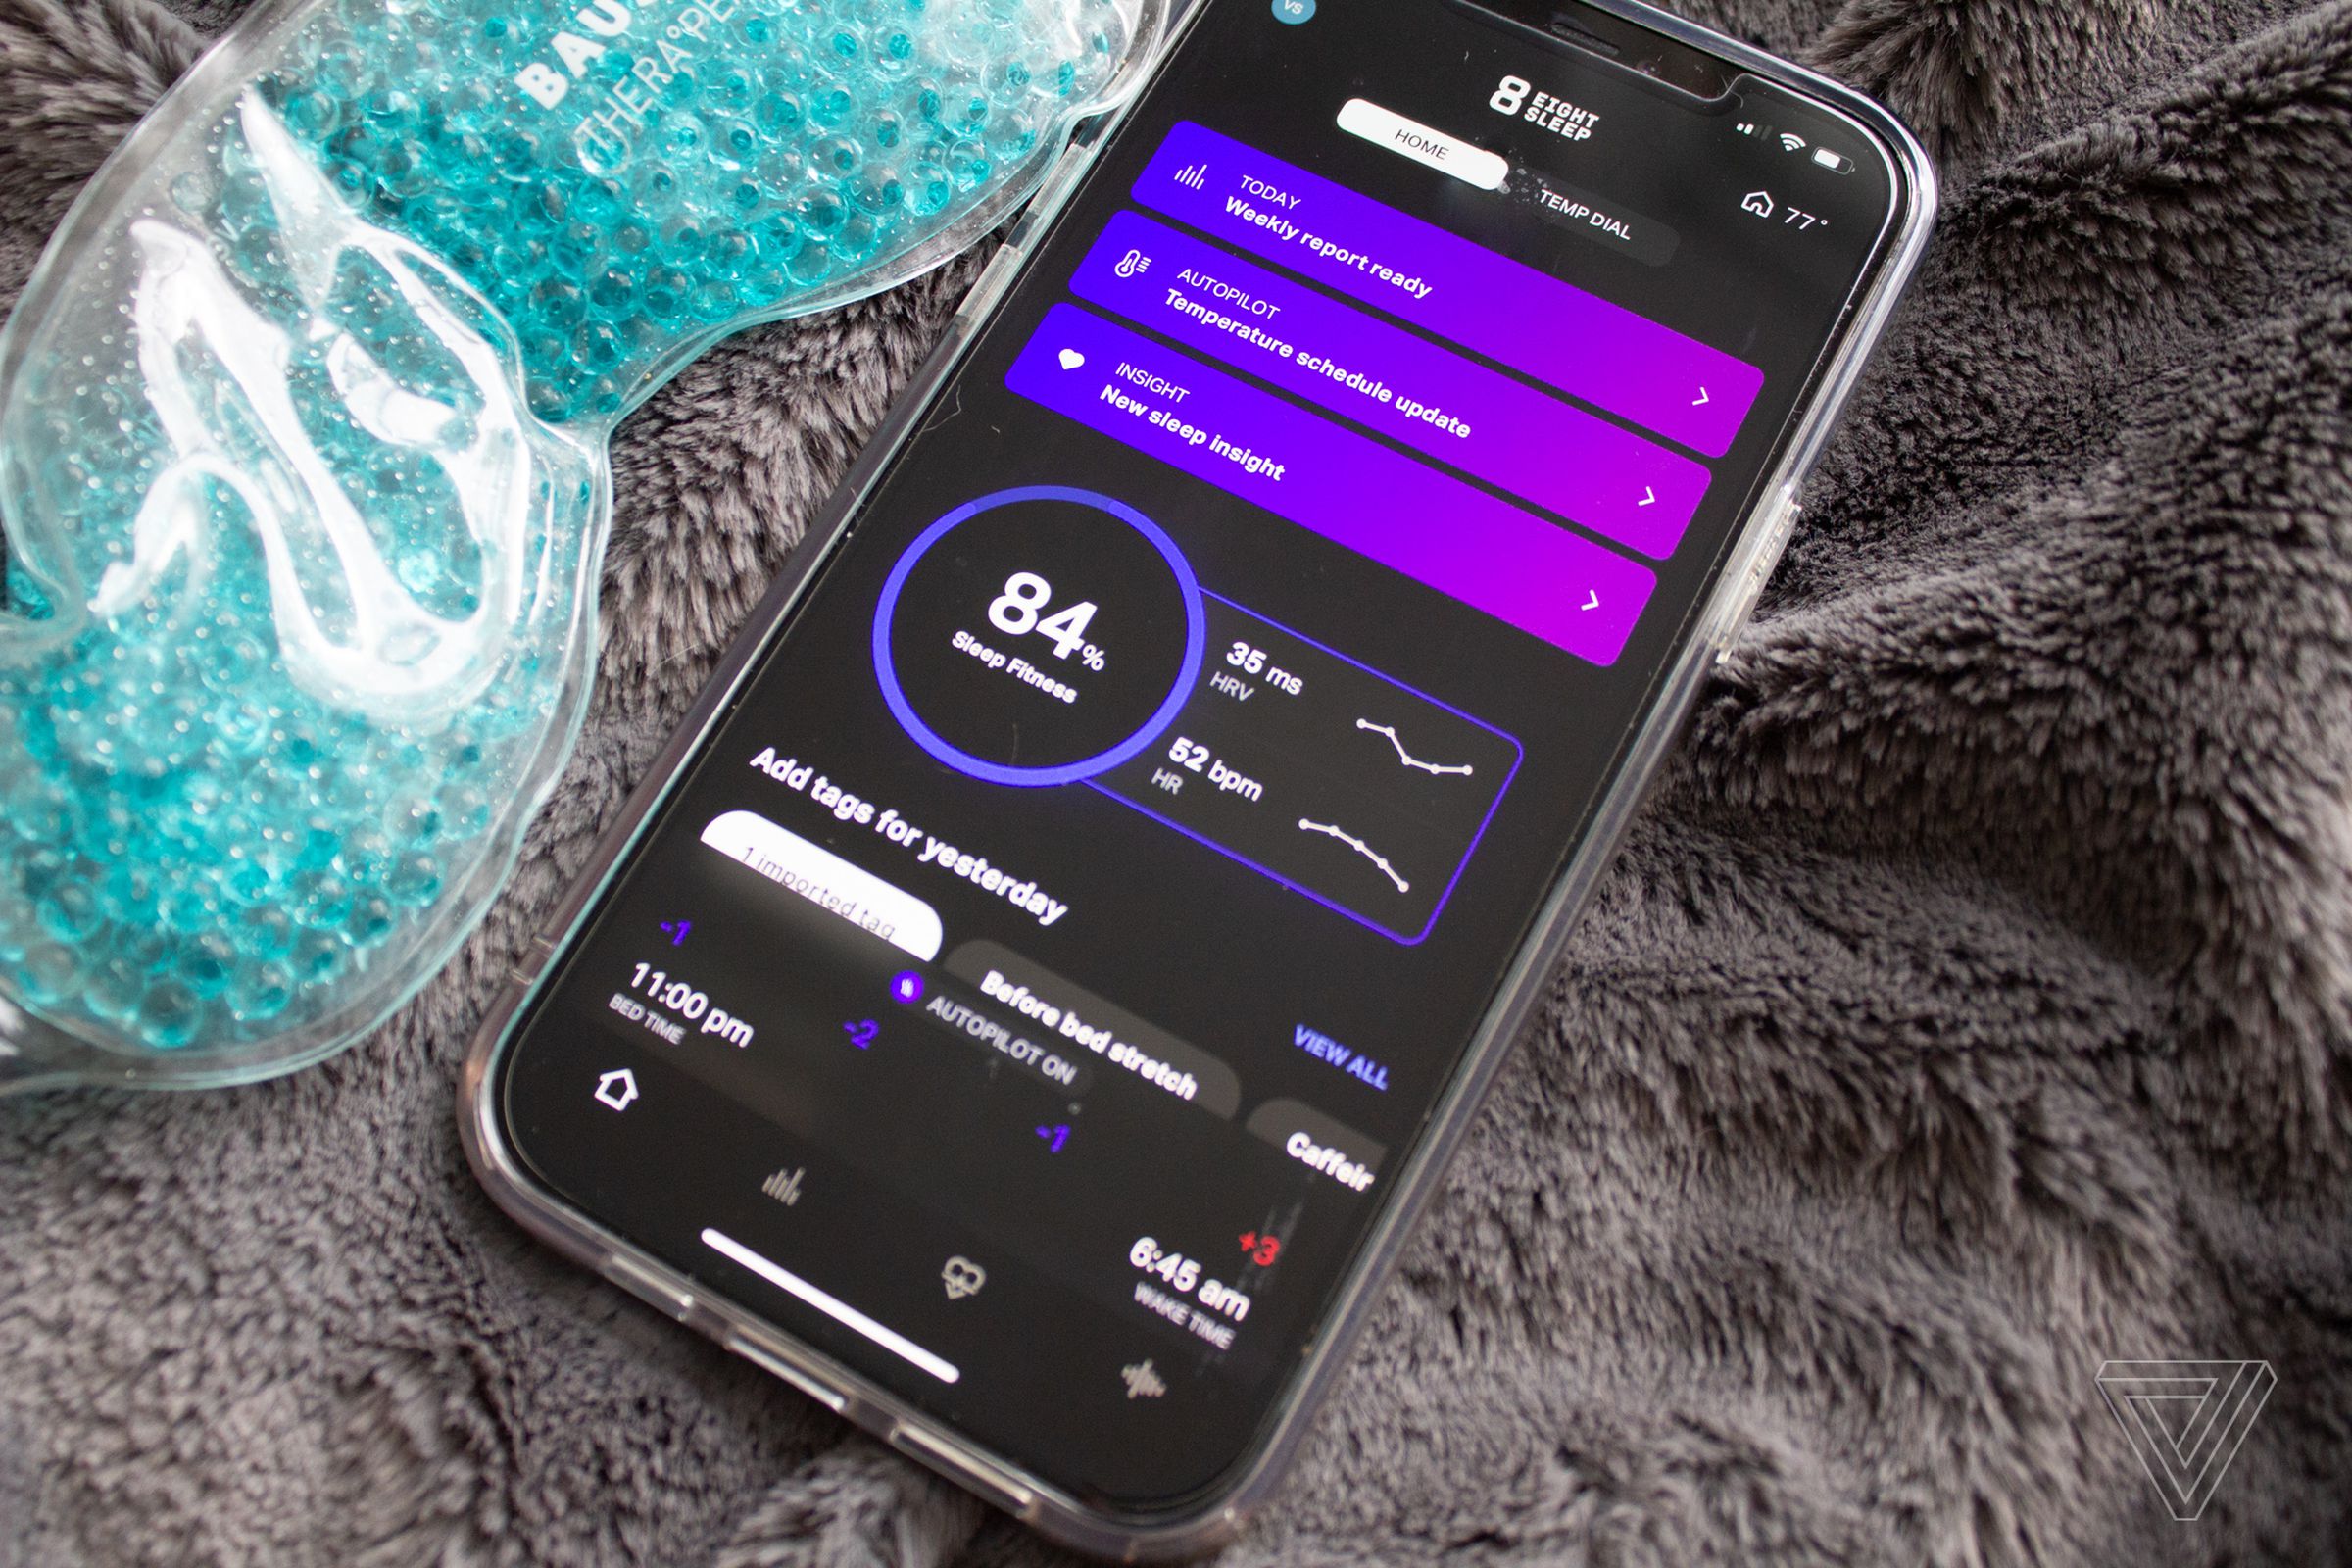 The Eight Sleep app on an iPhone displaying notifications for weekly reports and sleep insights